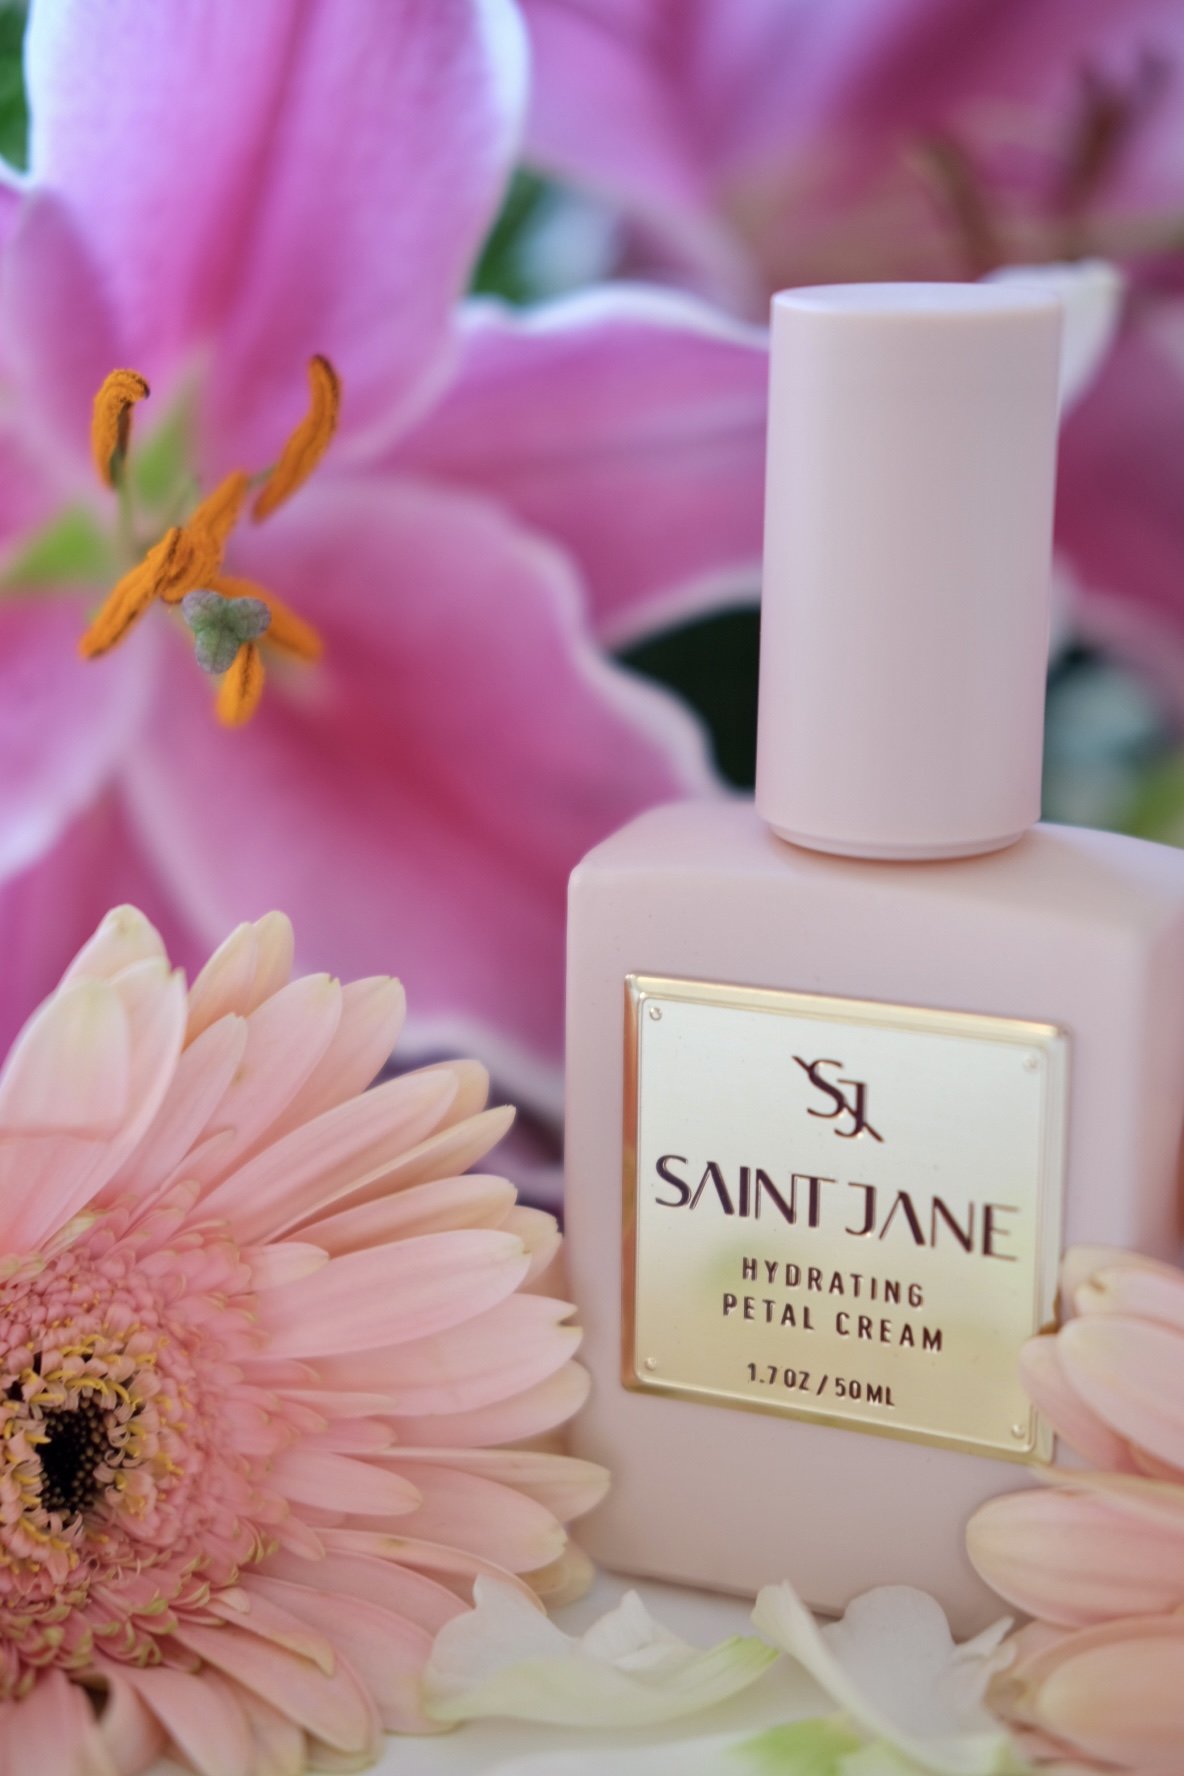 The next Saint Jane beauty review that I want to go through is a Saint Jane Petal Cream Review.   Saint Jane Petal Cream came out in 2021 and I was one of the lucky ones to get my hands on it when it first launched. The Saint Jane Petal Moisturizer i